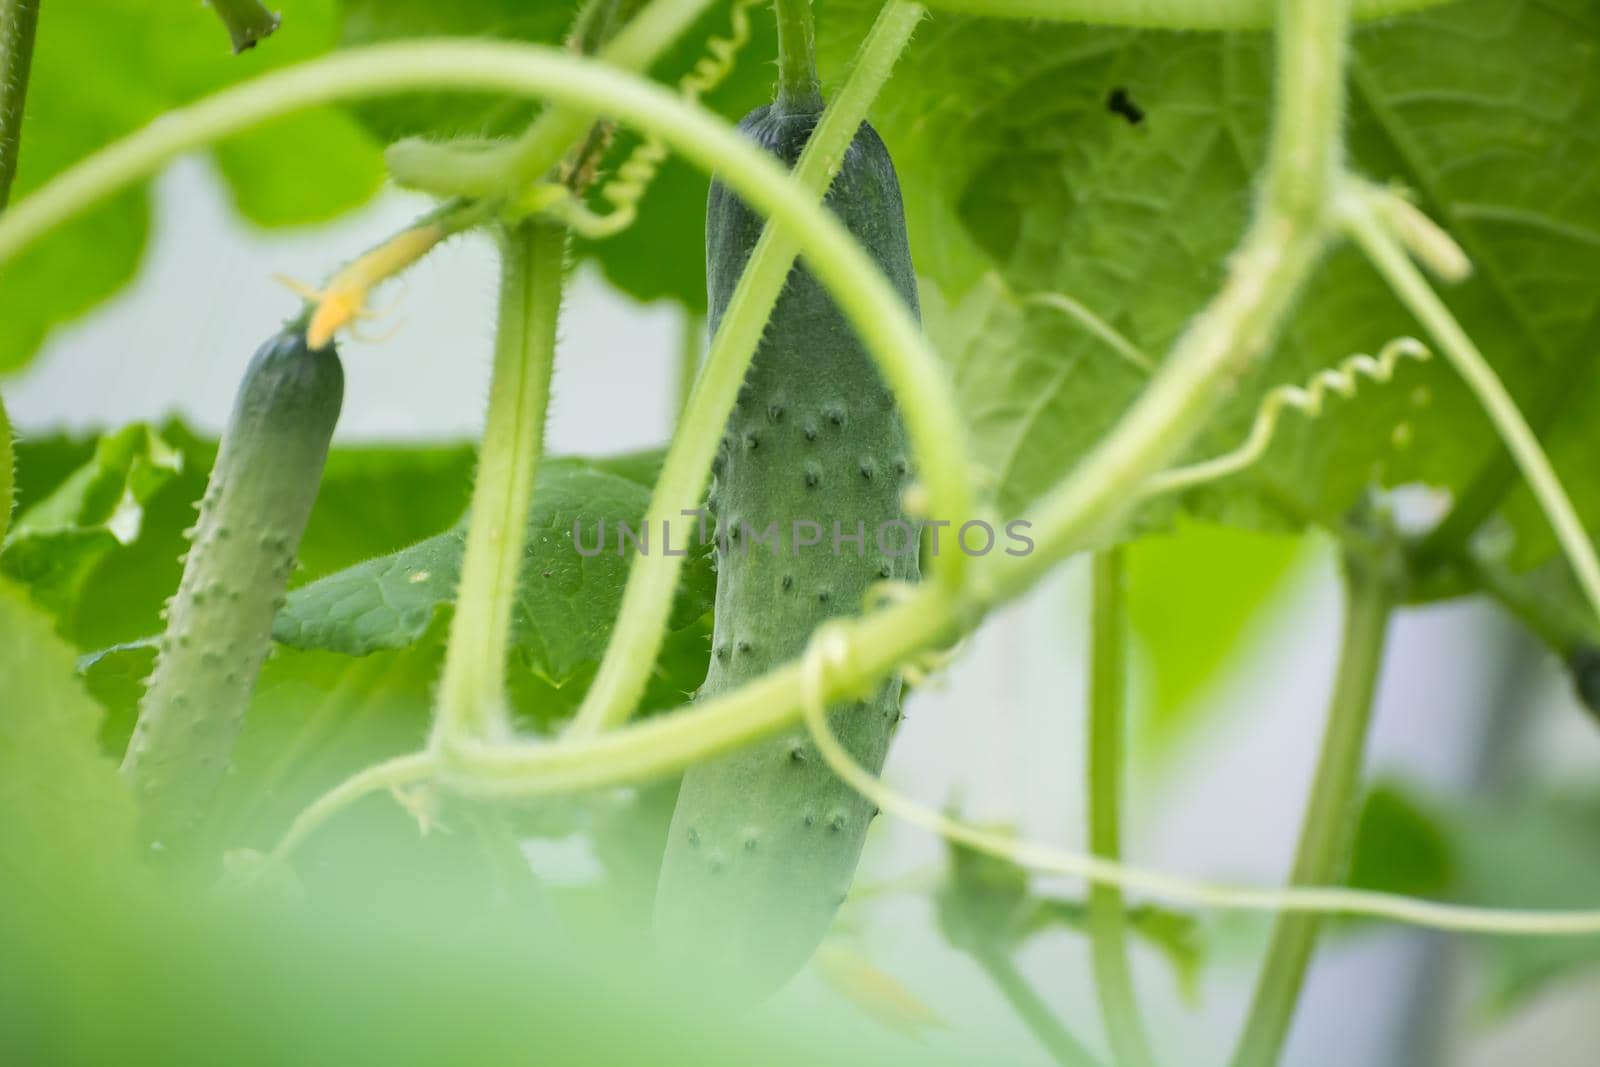 Cucumbers among green leaves, macro photo, shallow depth of field. Harvesting autumn vegetables. Healthy food concept, vegetarian diet of raw fresh food. Non-GMO organic food.